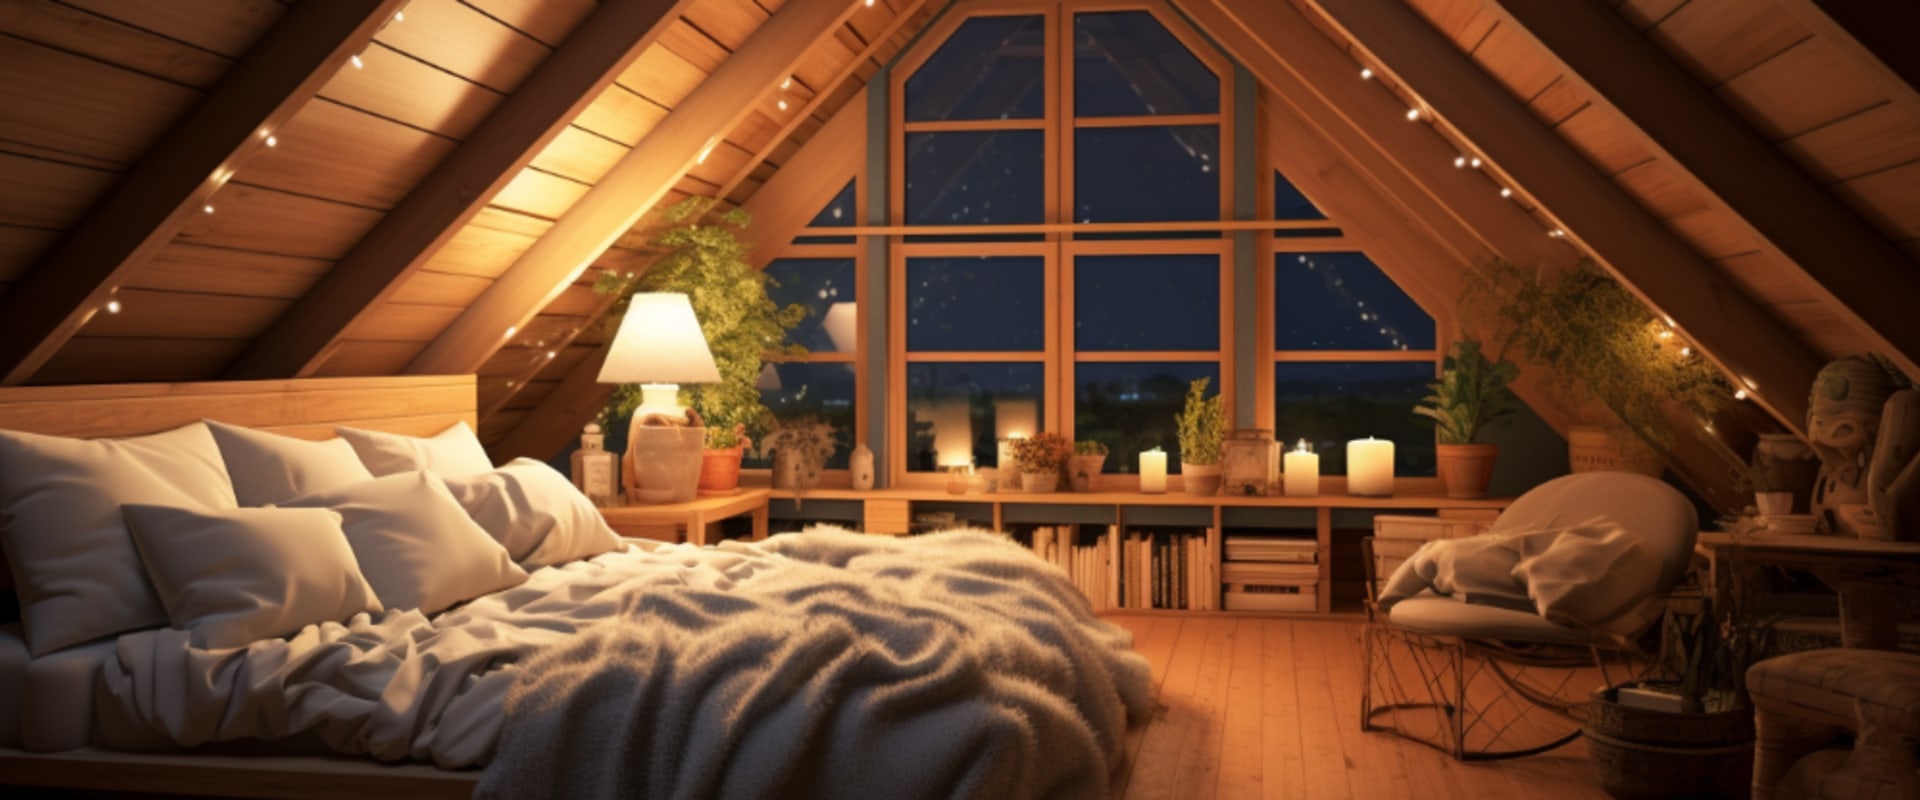 Maximizing Energy Efficiency With Attic Insulation Installation Contractors in Homestead FL